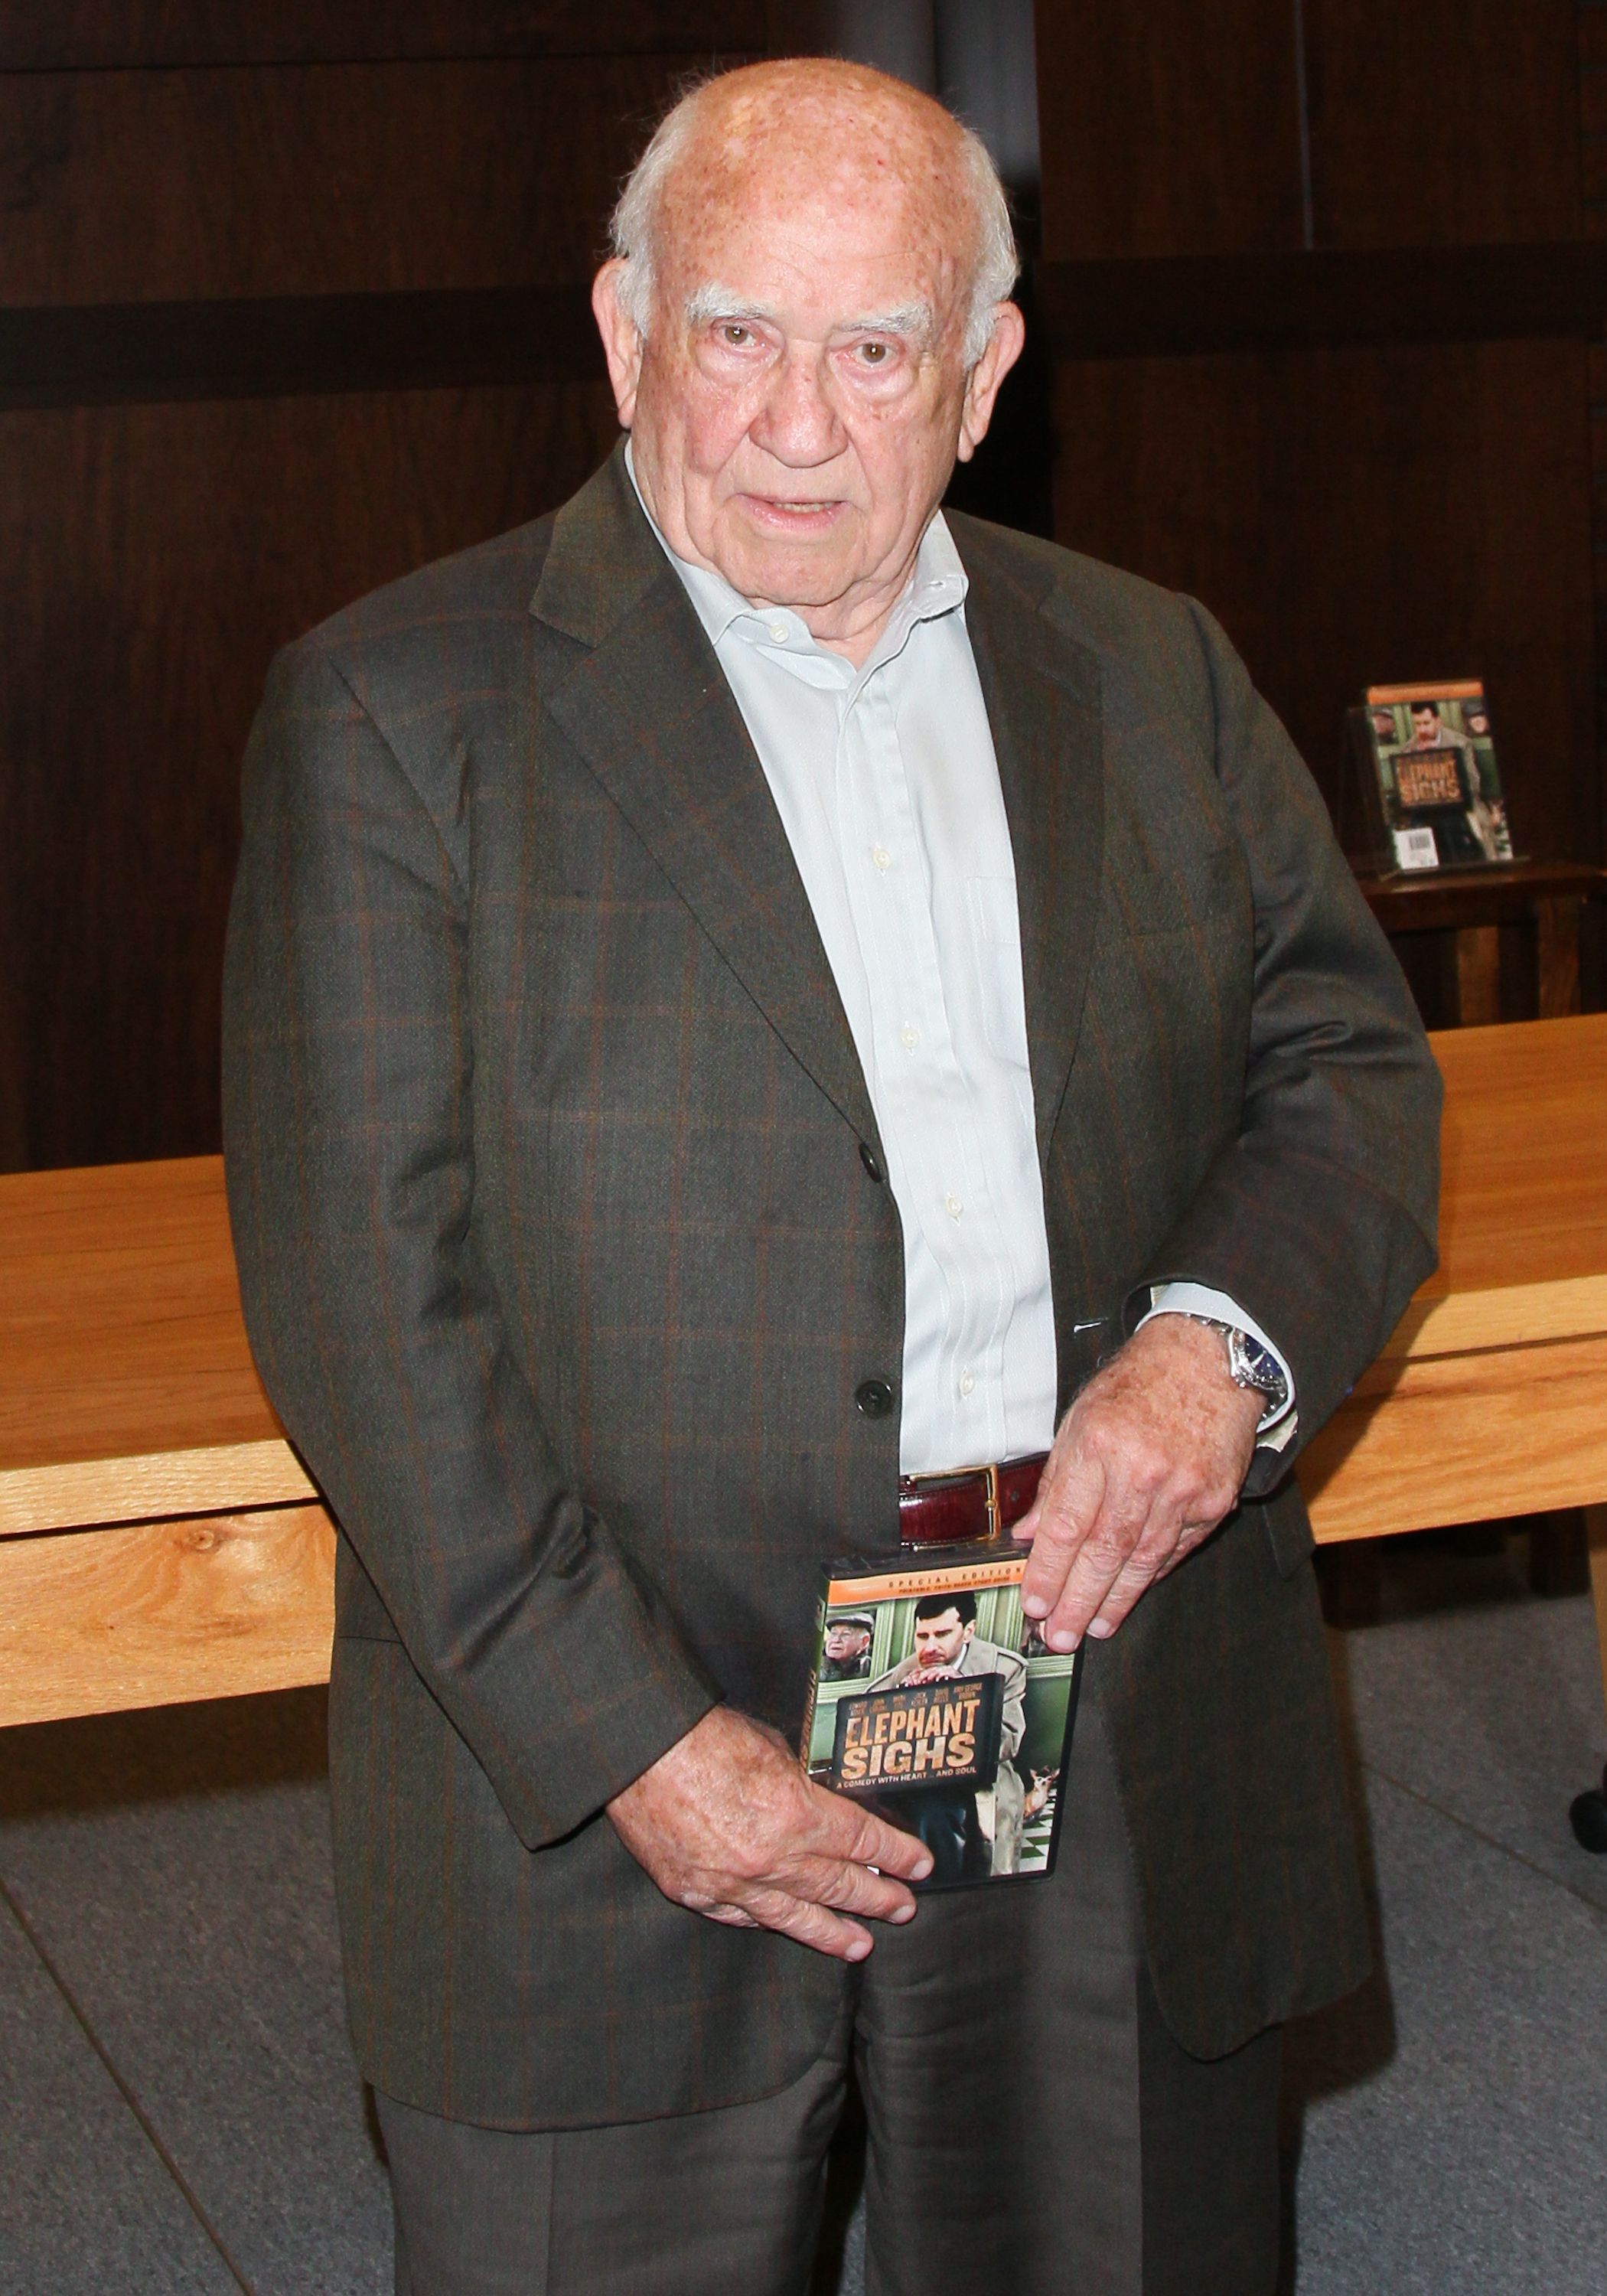 Ed Asner at the DVD signing for "Elephant Sighs" at Barnes & Noble bookstore on June 12, 2012, in Los Angeles, California | Photo: Paul Archuleta/Getty Images